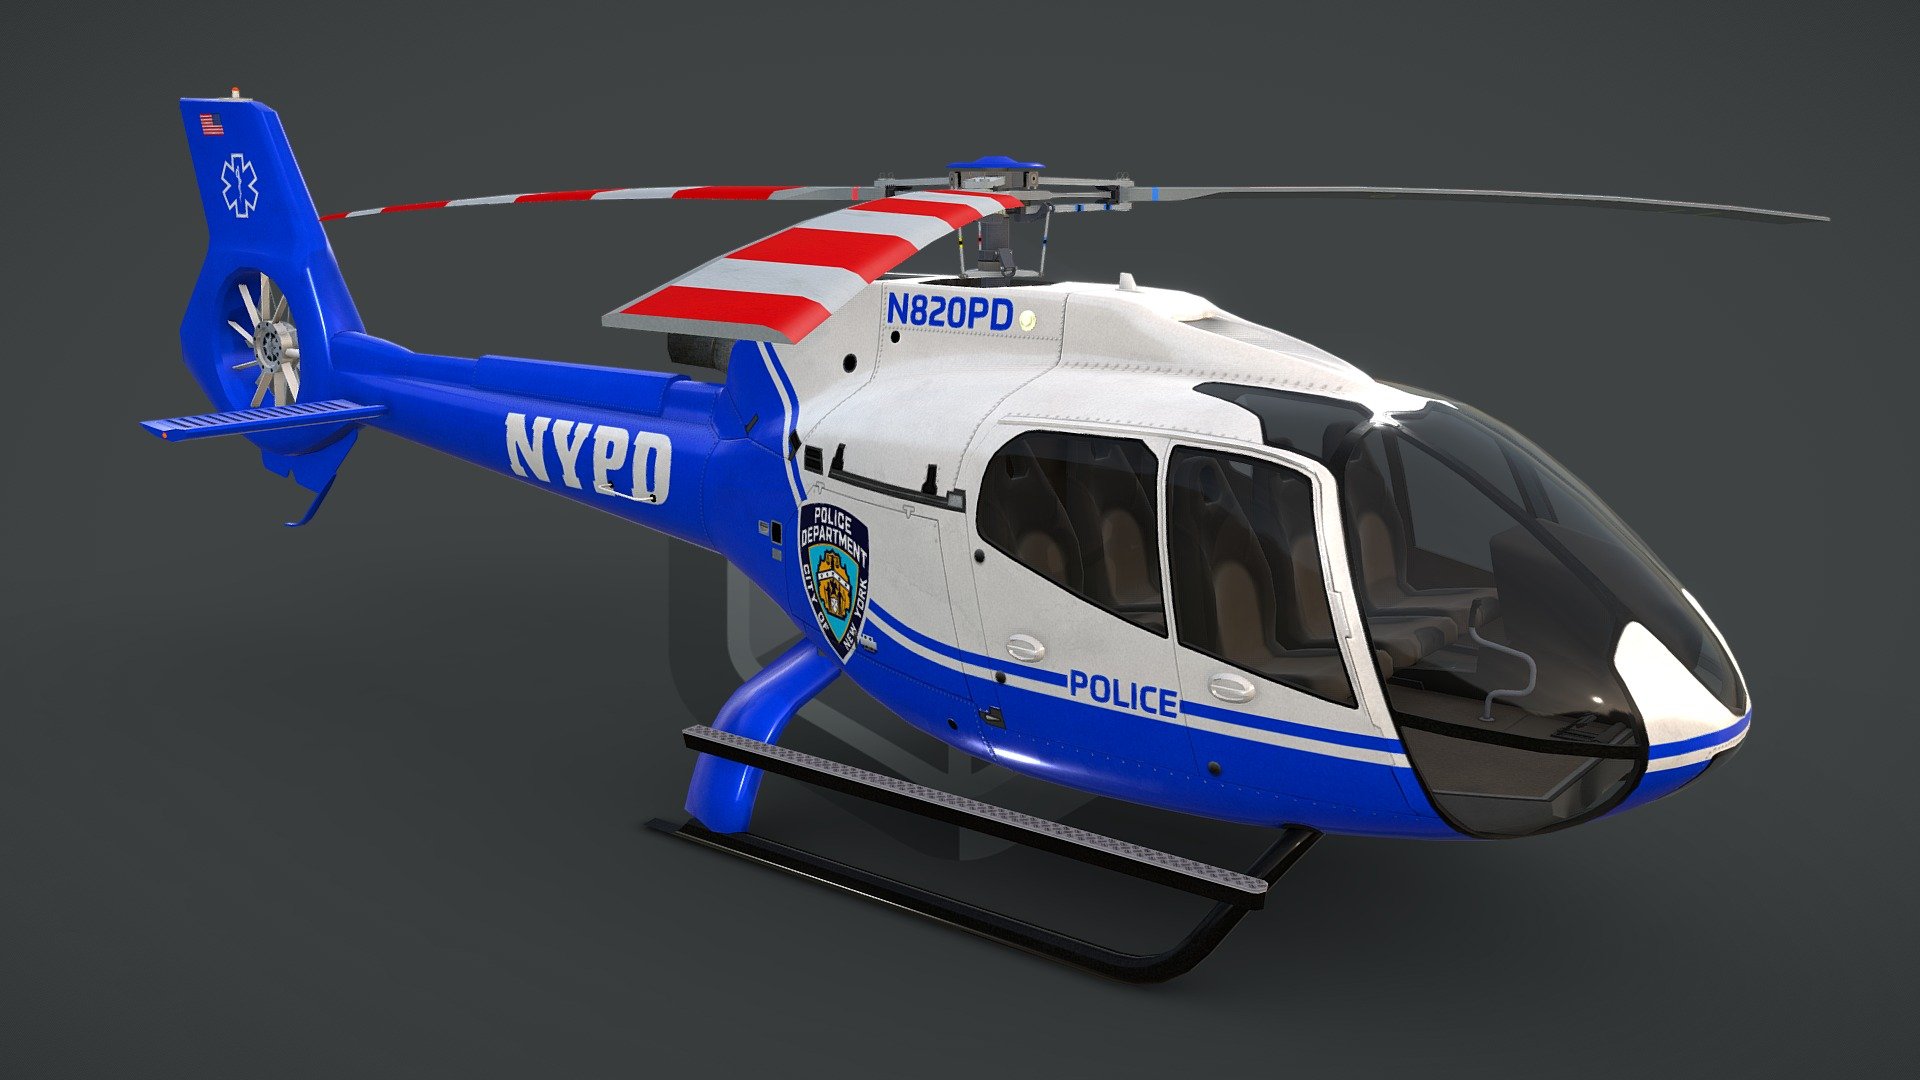 game ready, realtime optimized game asset

unique livery and branding

both PBR workflows ready

LOD0 is HQ lowpoly with bended top rotor, all lights objects and interior

LOD0 19710 tris, LOD1 10462 tris, LOD2 7388 tris, LOD3 5990 tris

100% triangulated and 100% unwrapped non-overlapping

5 x uv layouts, body, HQ rotors, LQ rotors, interior, lights

made using blueprints, real world scale meters

all rotors detached and animable in each LOD with properly placed pivots for flawless animations

hideable capsule built interior that fits perfectly the body

interior is simple but a great basis for further elaboration

big textures pack with native 4096 x 4096 px textures for body, rotors, interior

LOD3 rotors have own textures with blades on alpha channel

light objects have own, small, textures, and contain an emission map

pack contains native .max scene, created in 3dsmax 2014

pack contains clean and flawless FBX and OBJ files

each LOD and all LOD together exported in each file format
 - NYPD Helicopter EC130-H130 Livery 14 - Buy Royalty Free 3D model by CGAmp 3d model